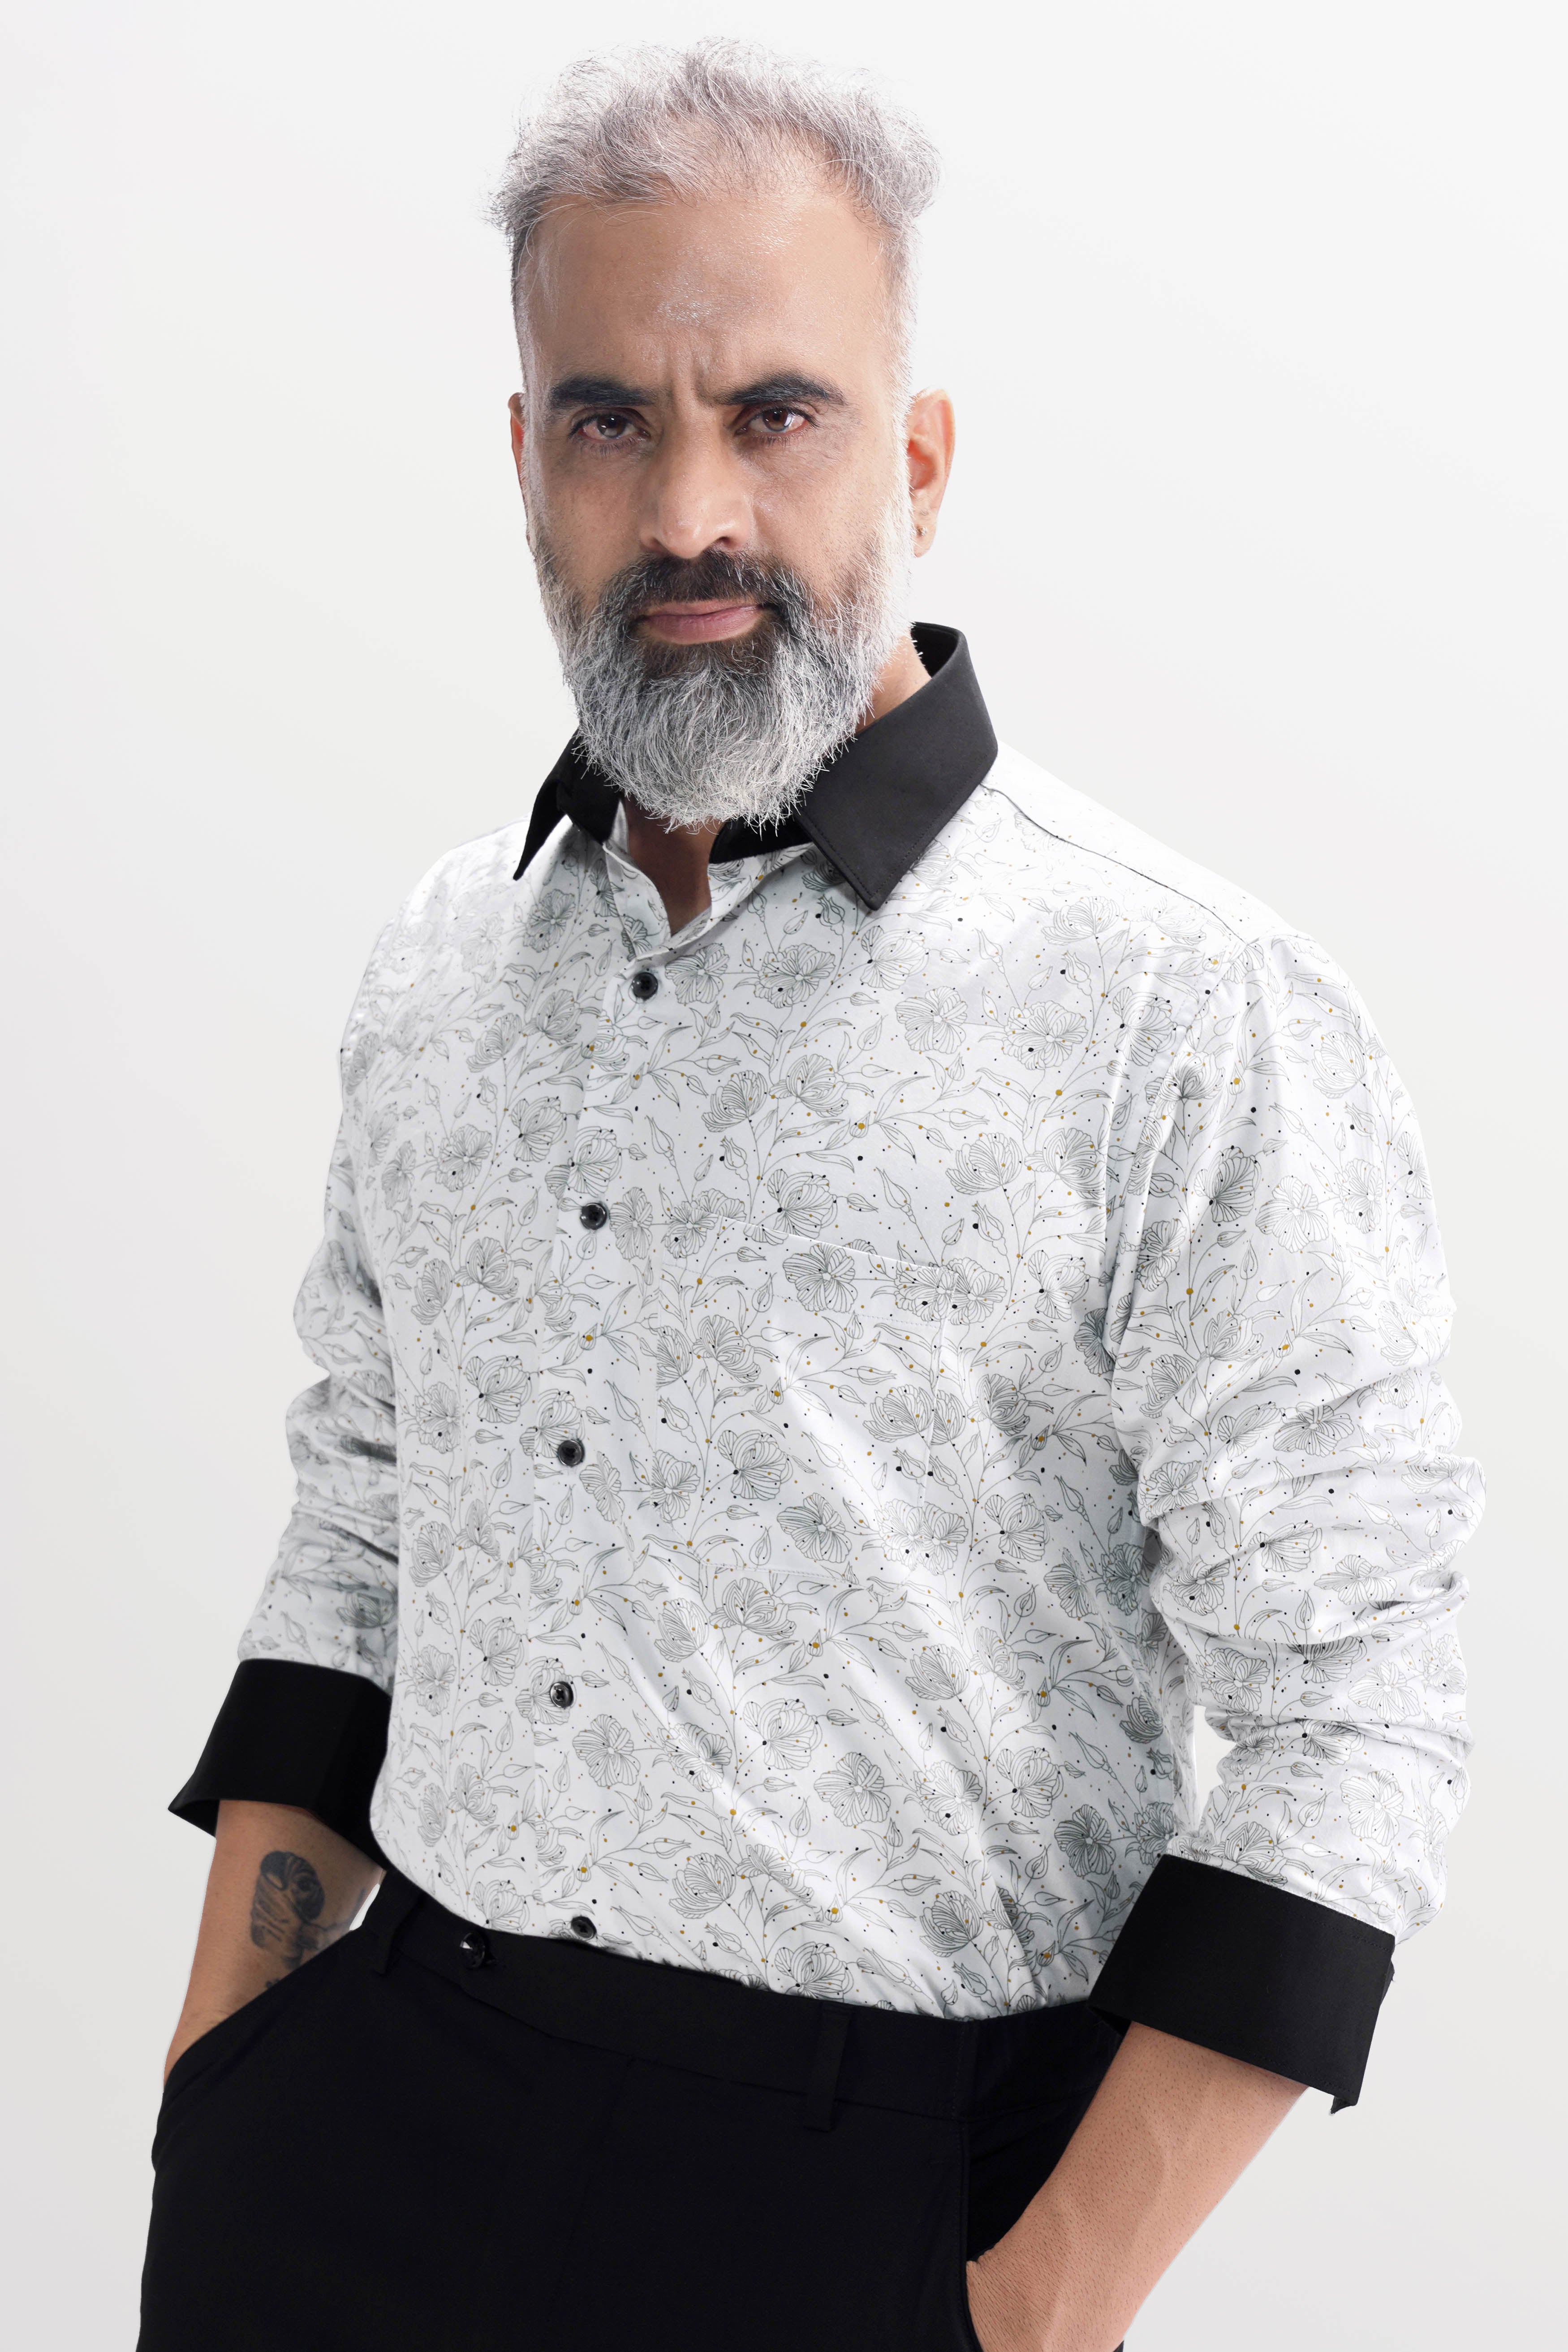 Bright White Floral Printed with Black Cuffs and Collar Super Soft Premium Cotton Shirt